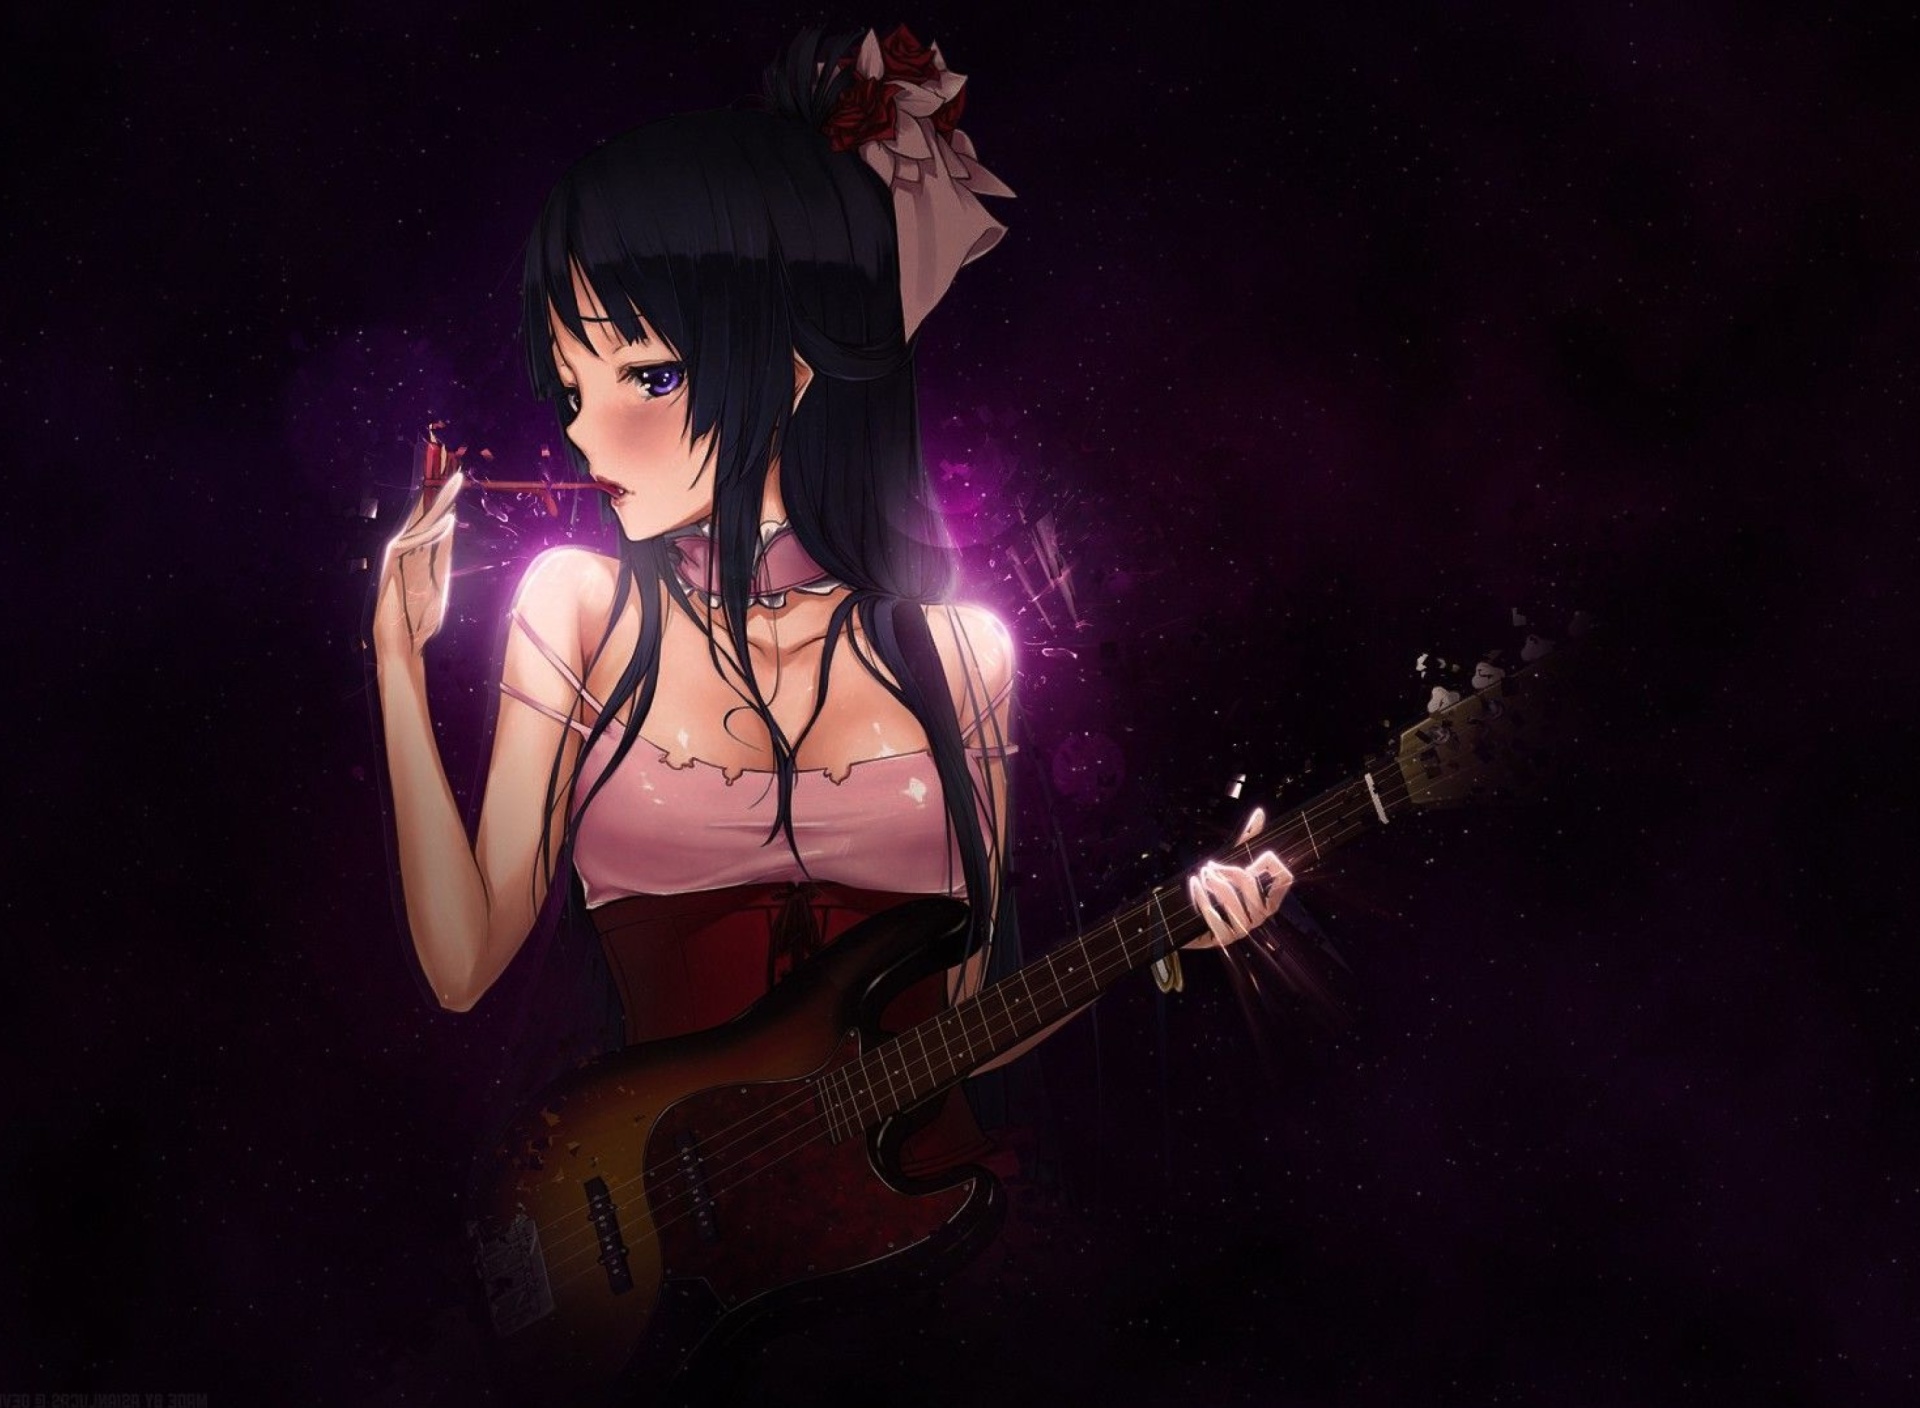 Anime Girl with Guitar wallpaper 1920x1408